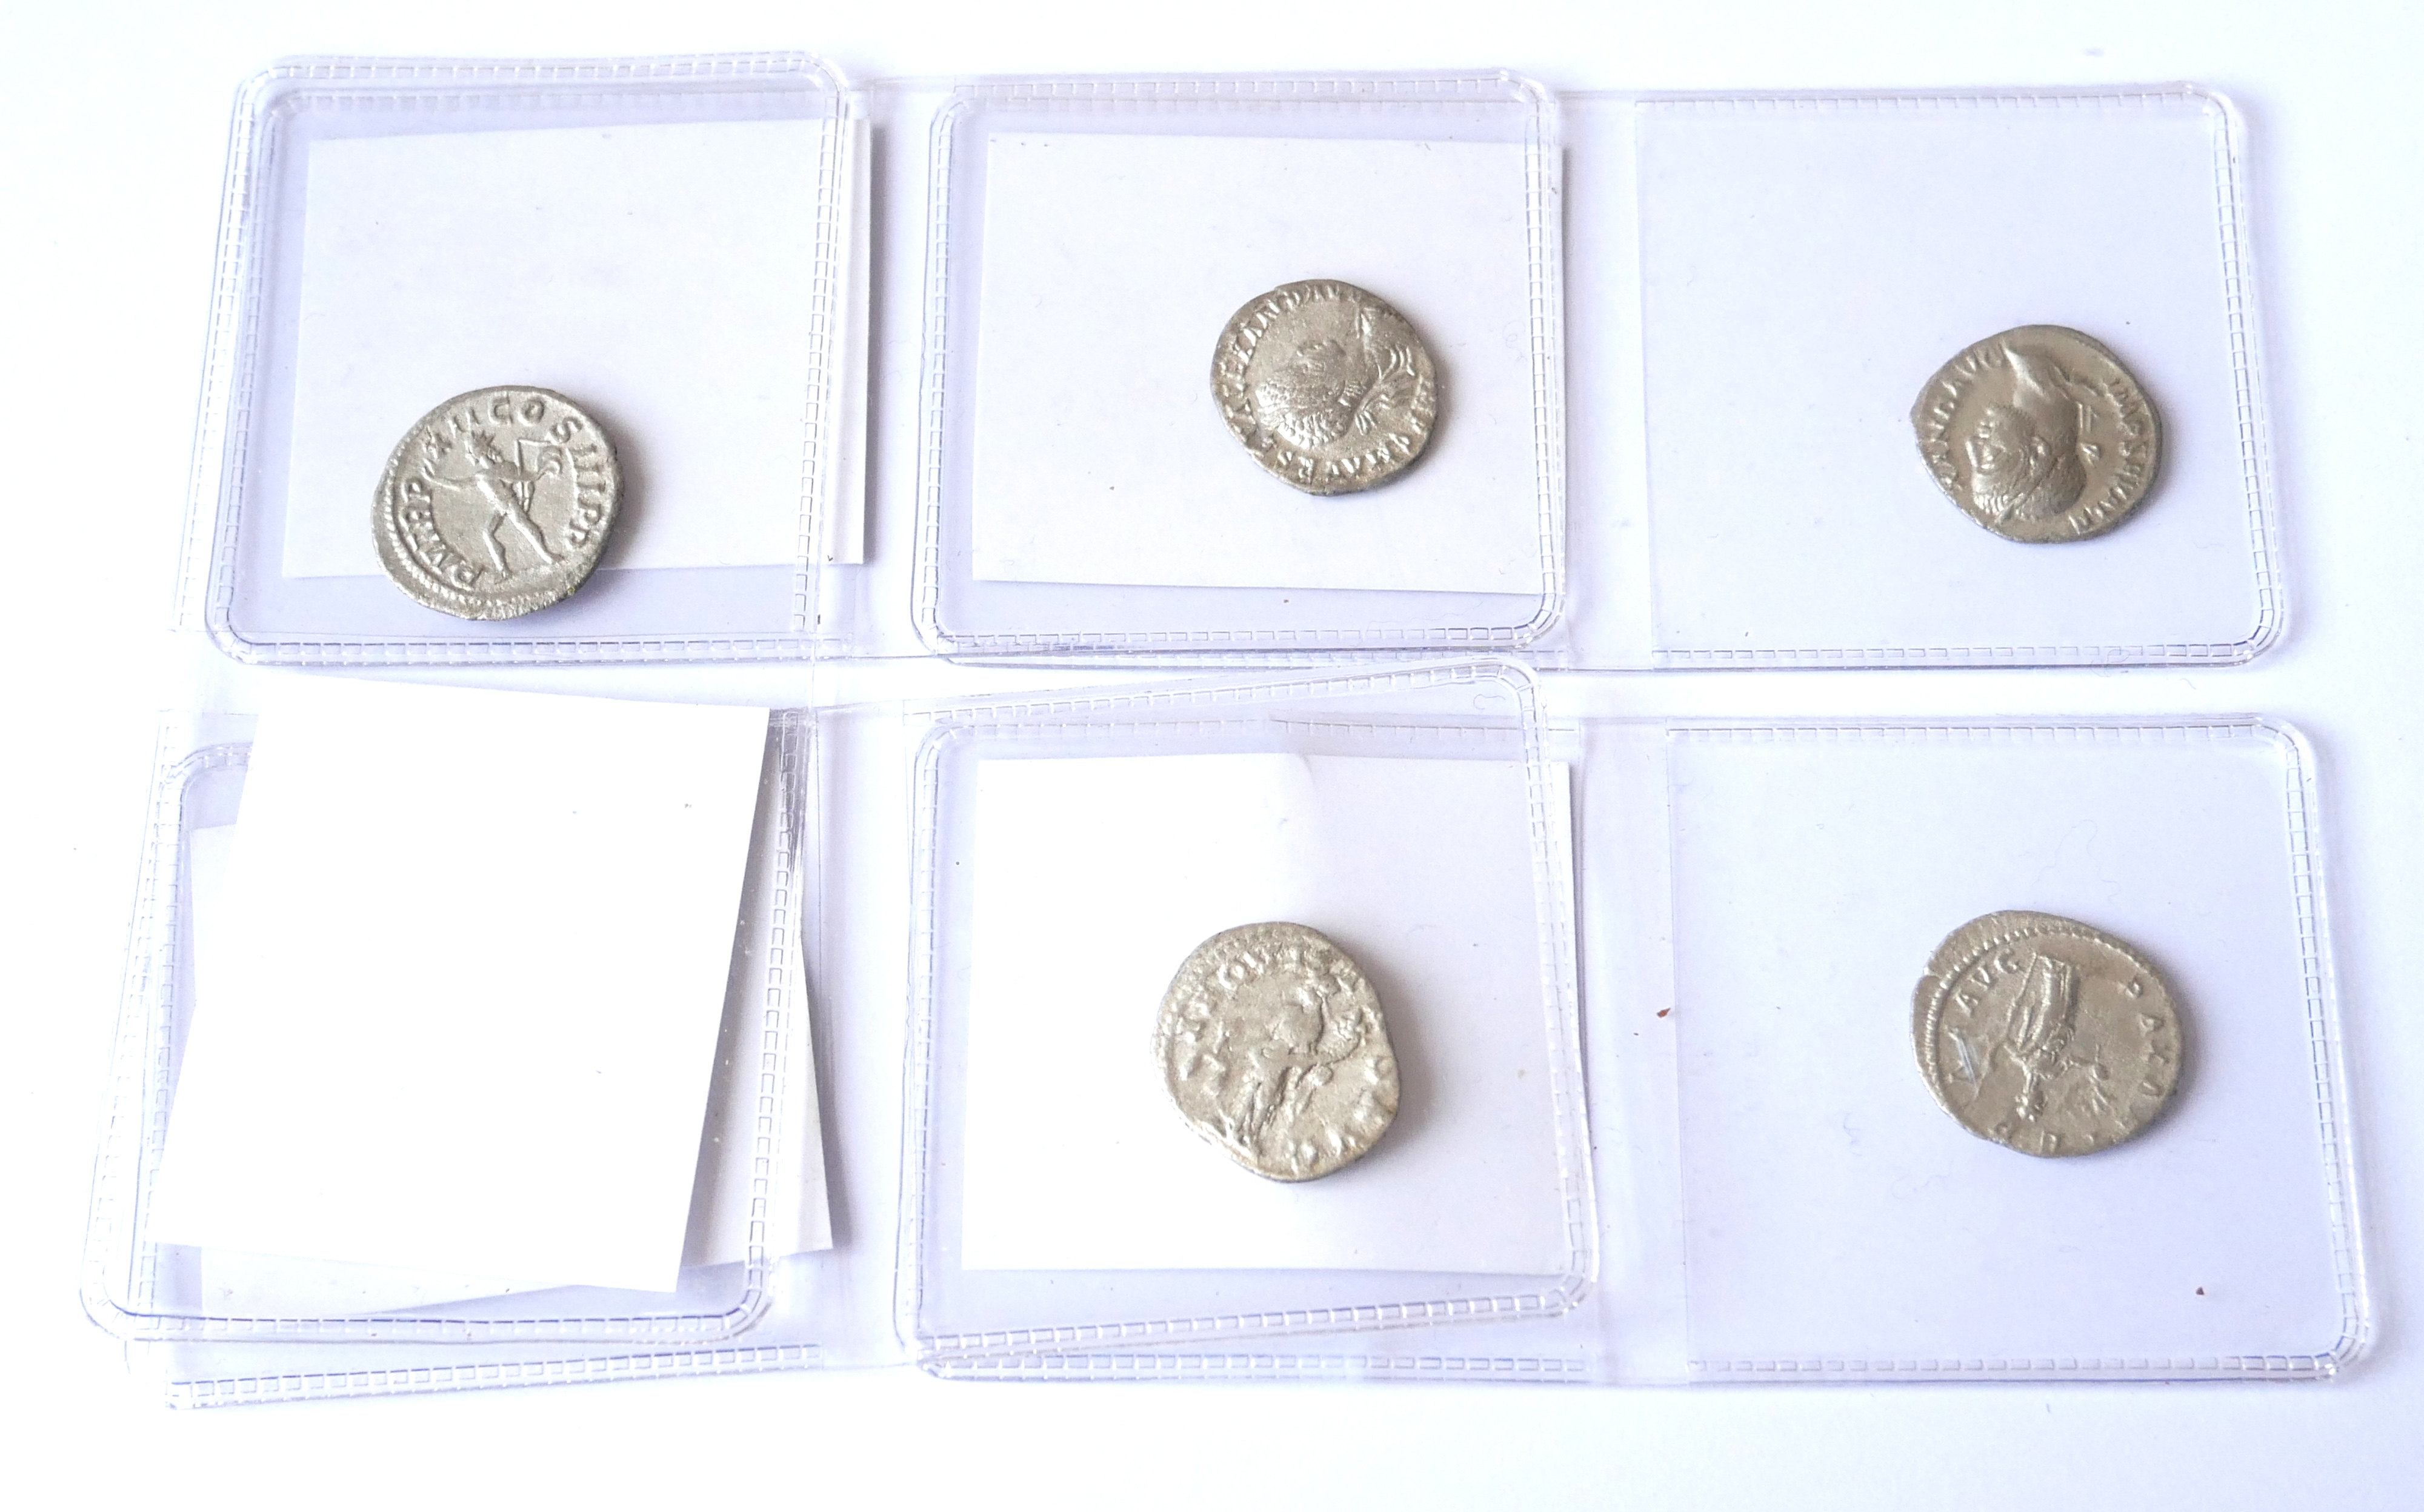 SEVERUS ALEXANDER, A COLLECTION OF FIVE ROMAN SILVER COINS Fides Militm,Rome Mint 233AD, Aequitas - Image 2 of 2